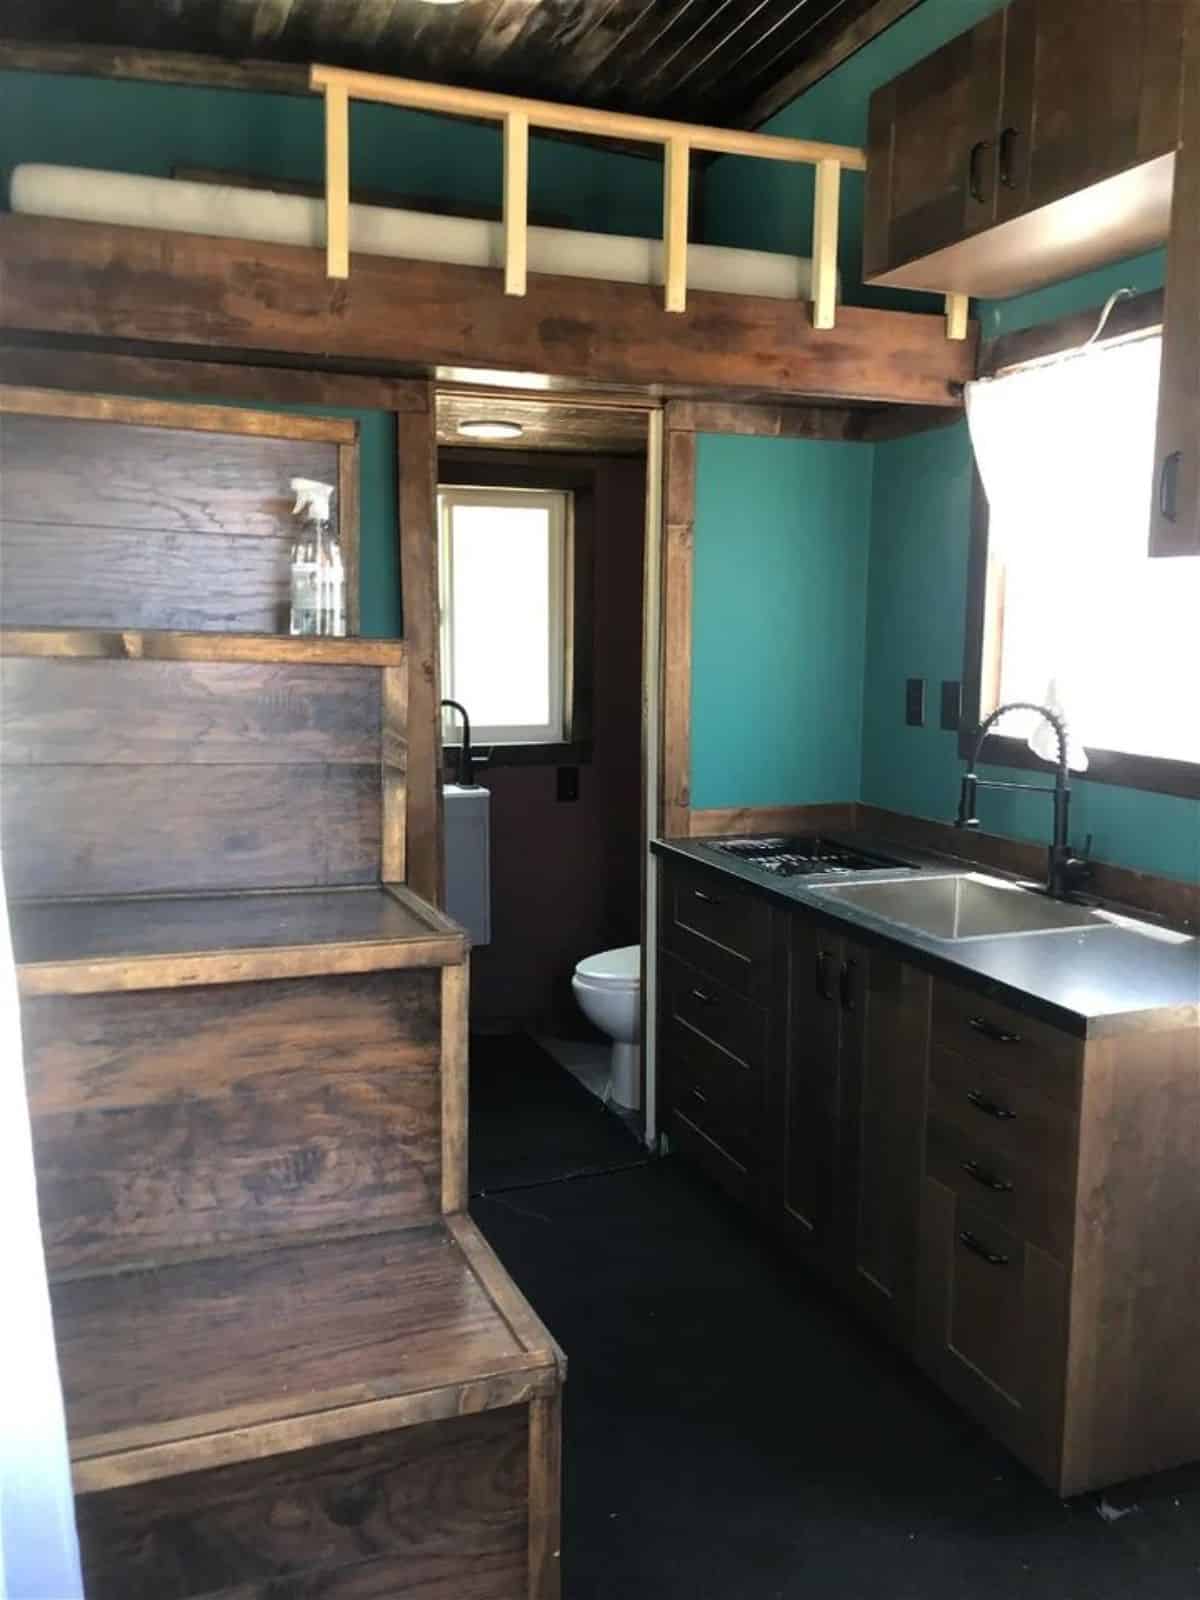 Bathroom of bargain tiny home has all the necessary fittings